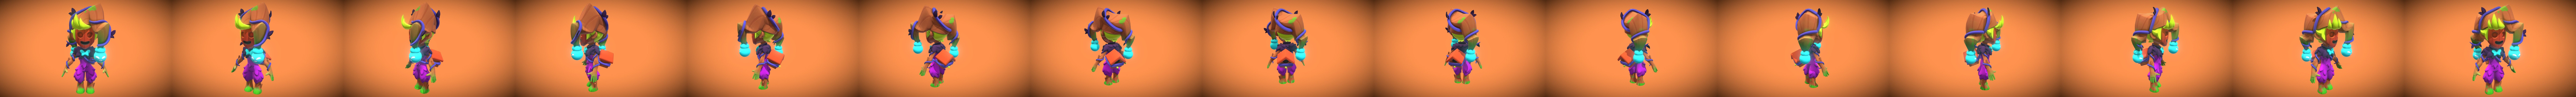 Wood Spirit Chester t-pose Brawl Stars - Download Free 3D model by